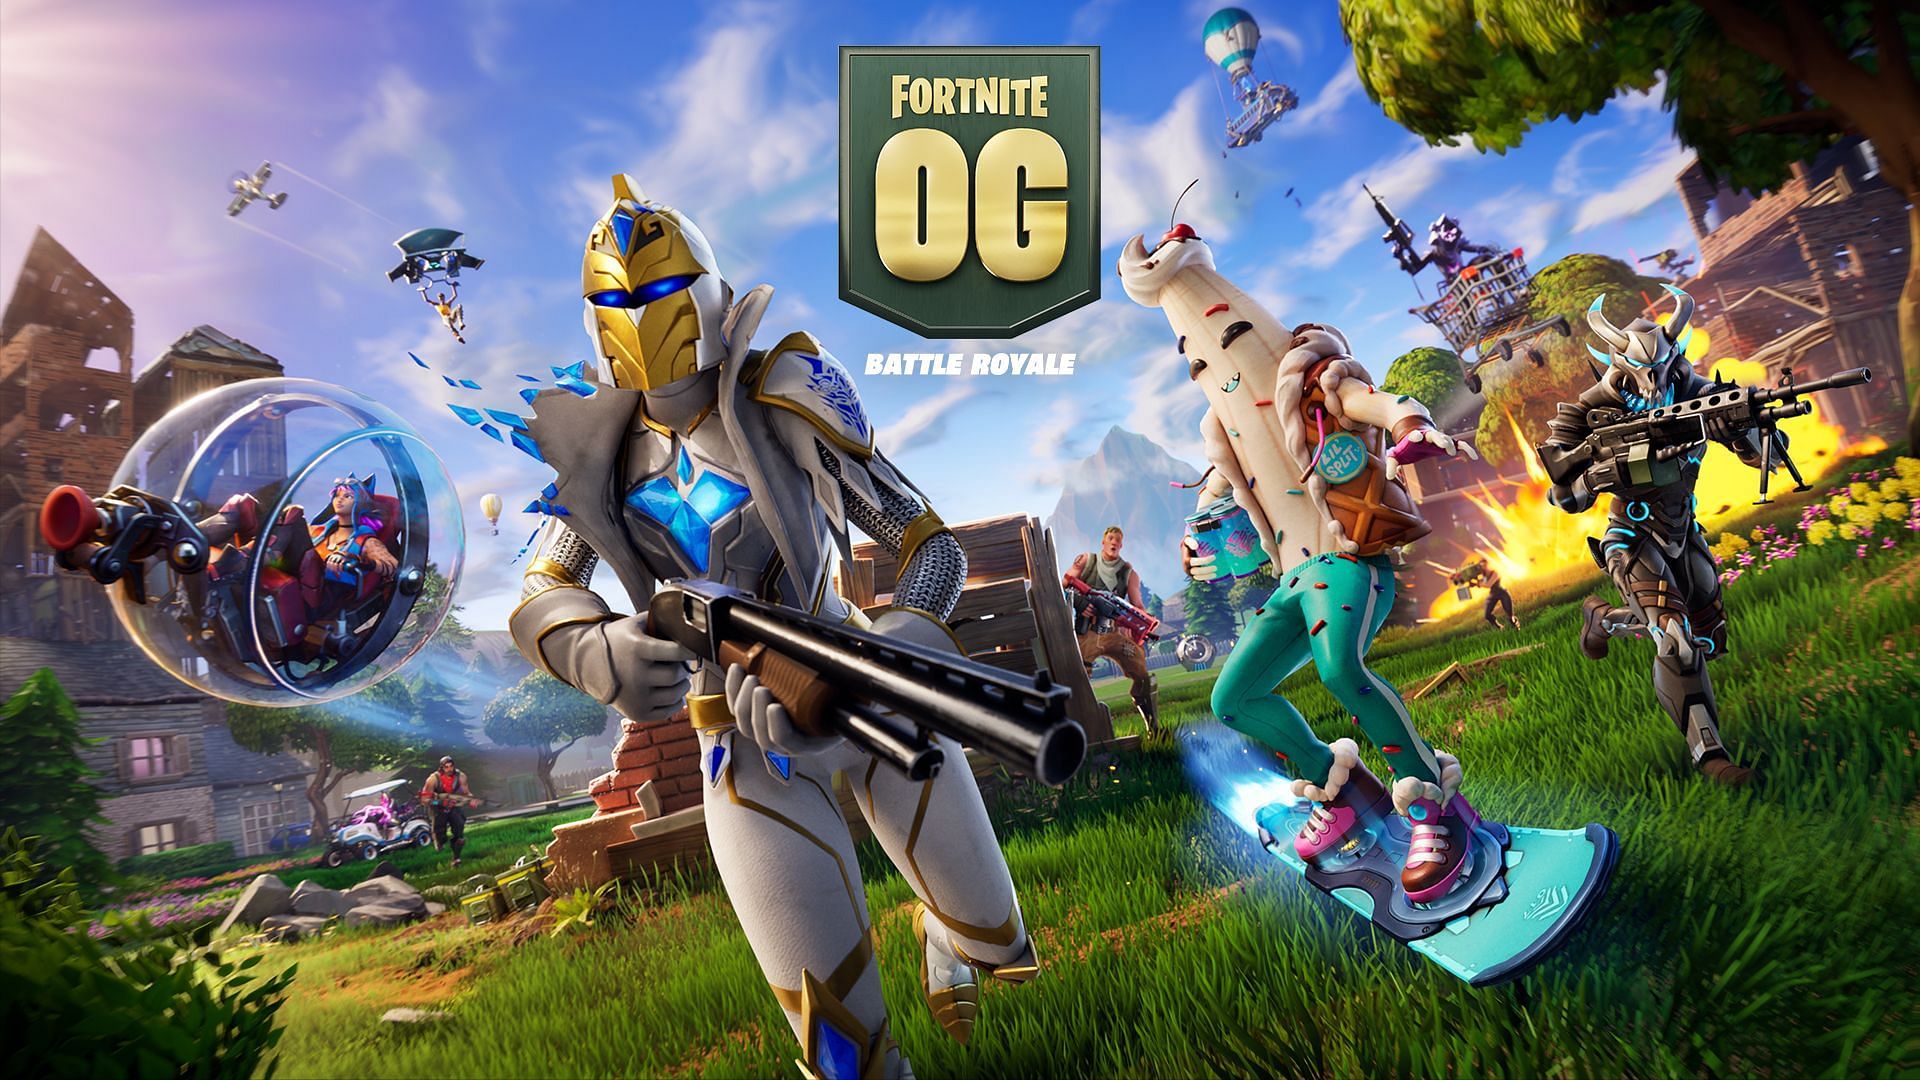 &quot;Fortnite iOS players got the new map early,&quot;: Satirical Reddit post goes viral